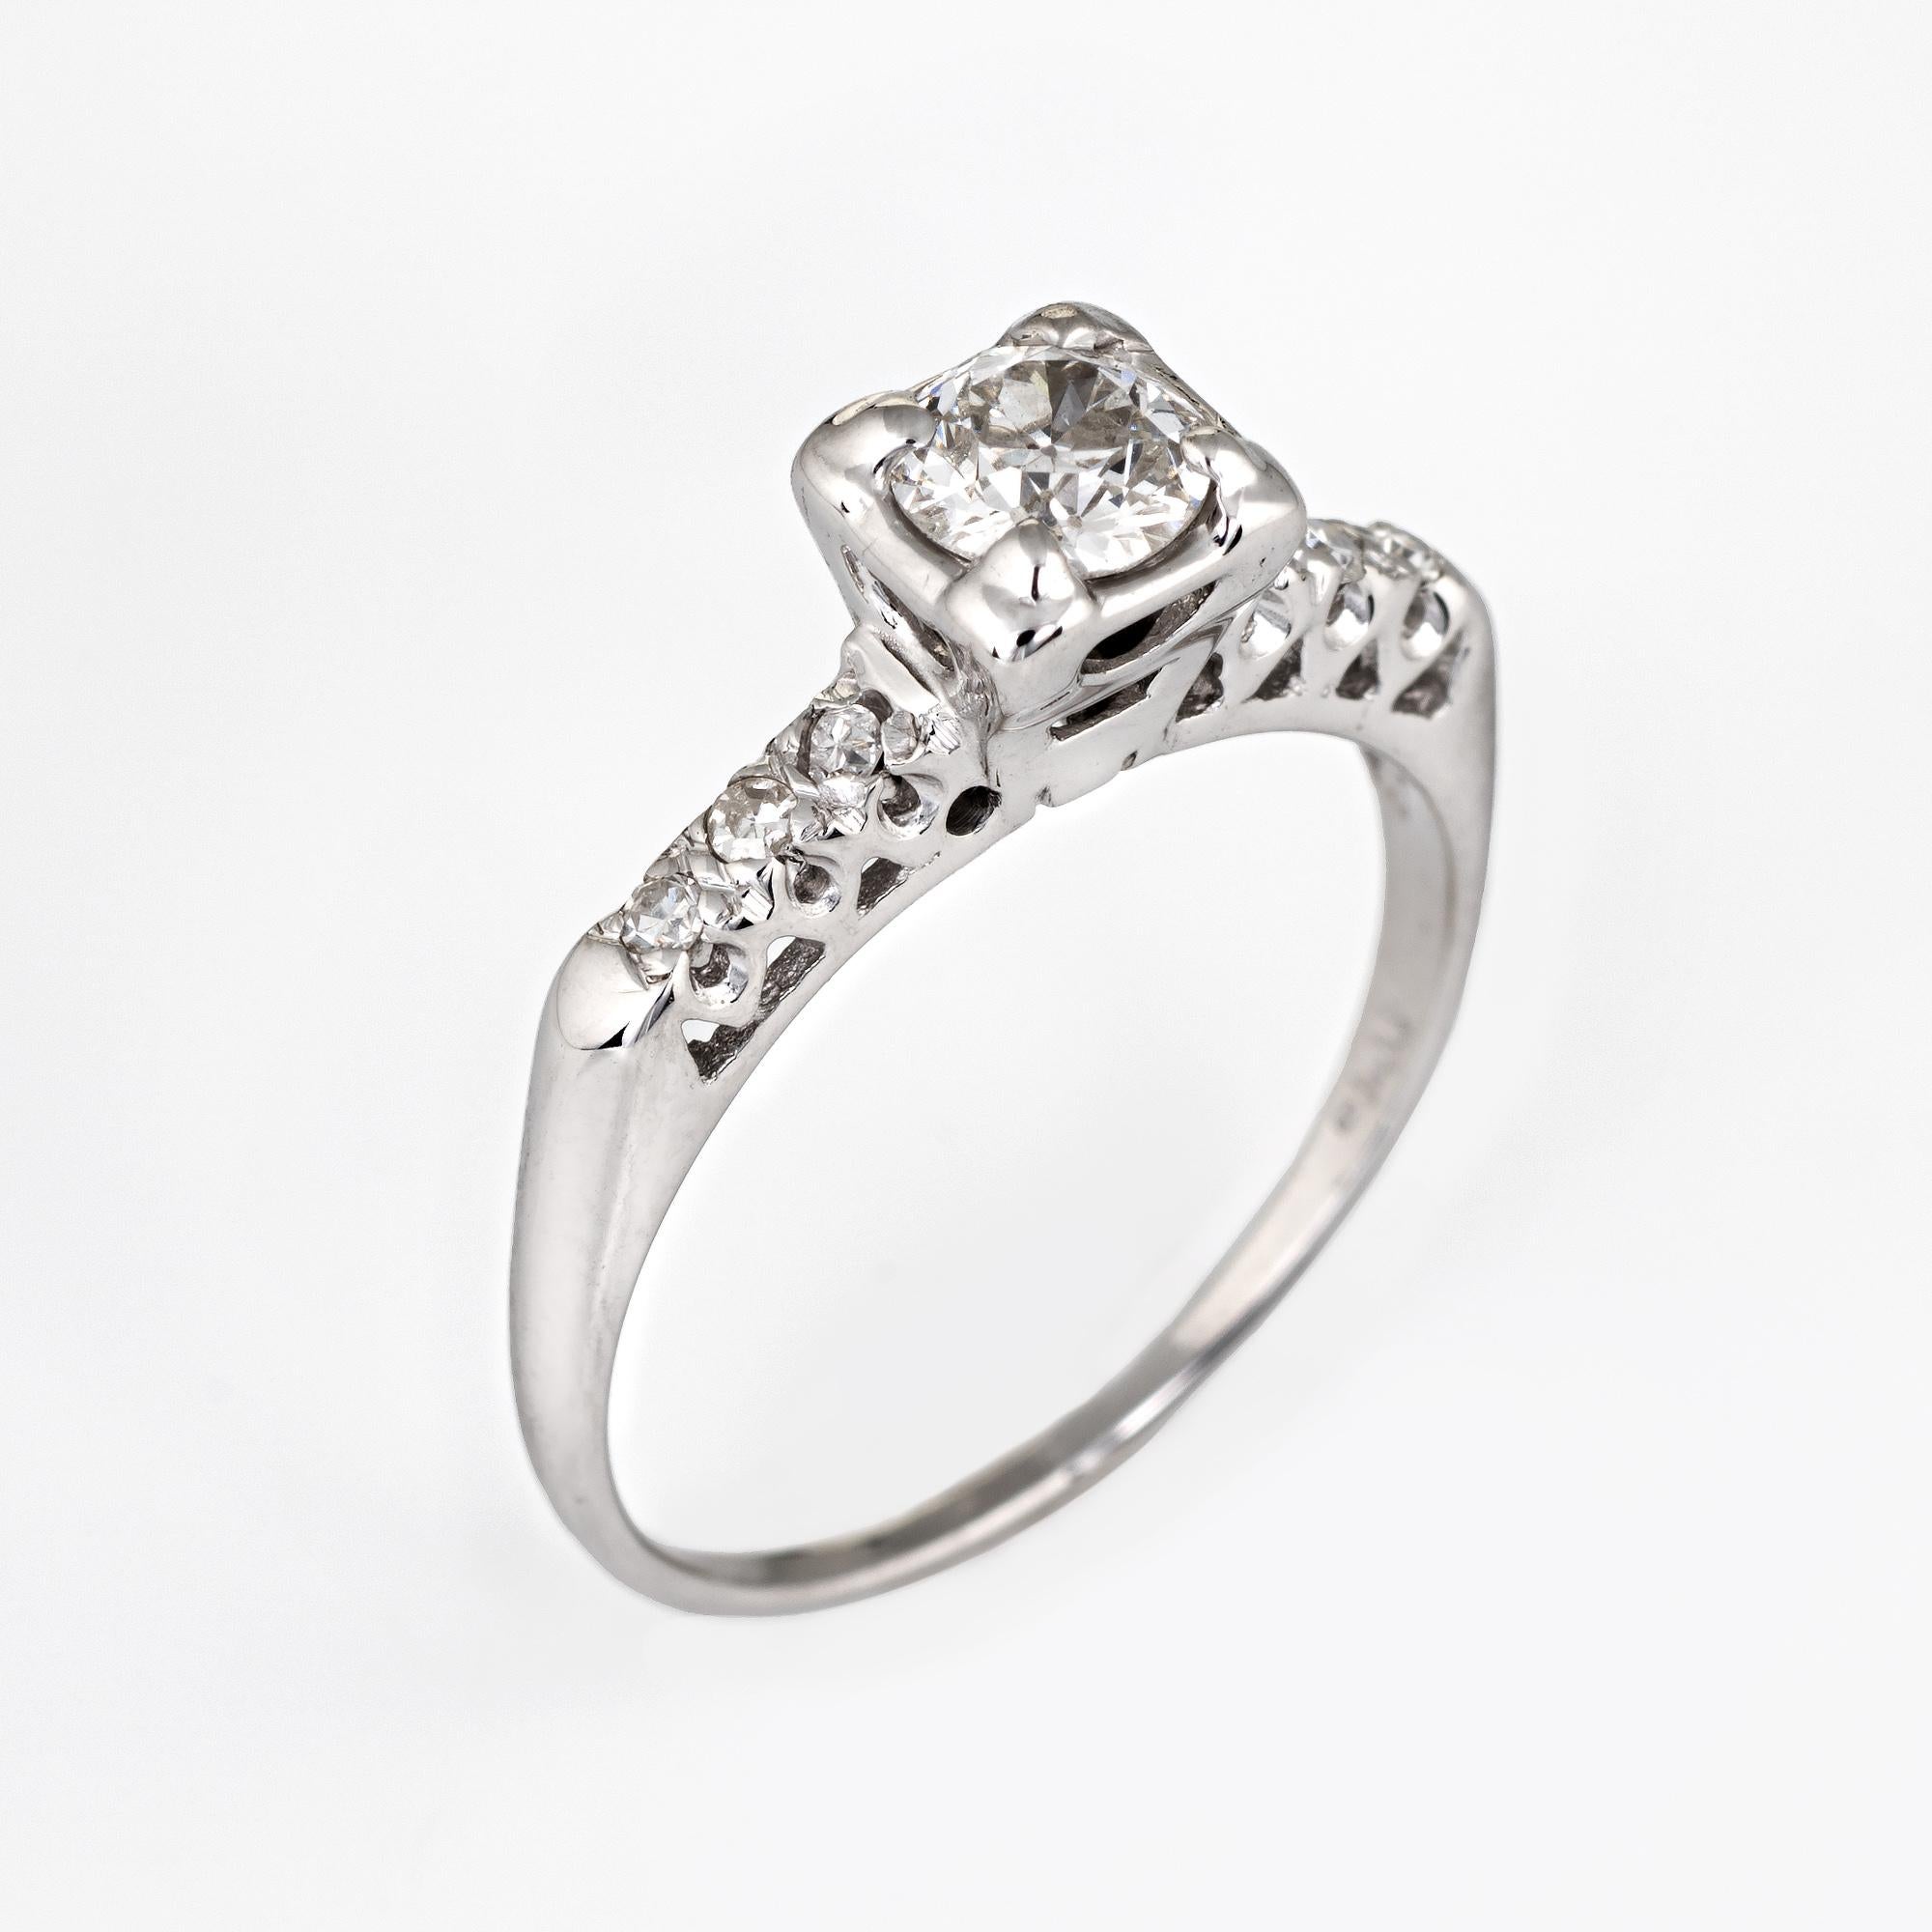 Finely detailed vintage diamond engagement ring (circa 1950s to 1960s) crafted in 14 karat white gold.

Centrally mounted old European cut diamond is estimated at 0.50 carat, accented with six estimated 0.01 carat single cut diamonds. The total